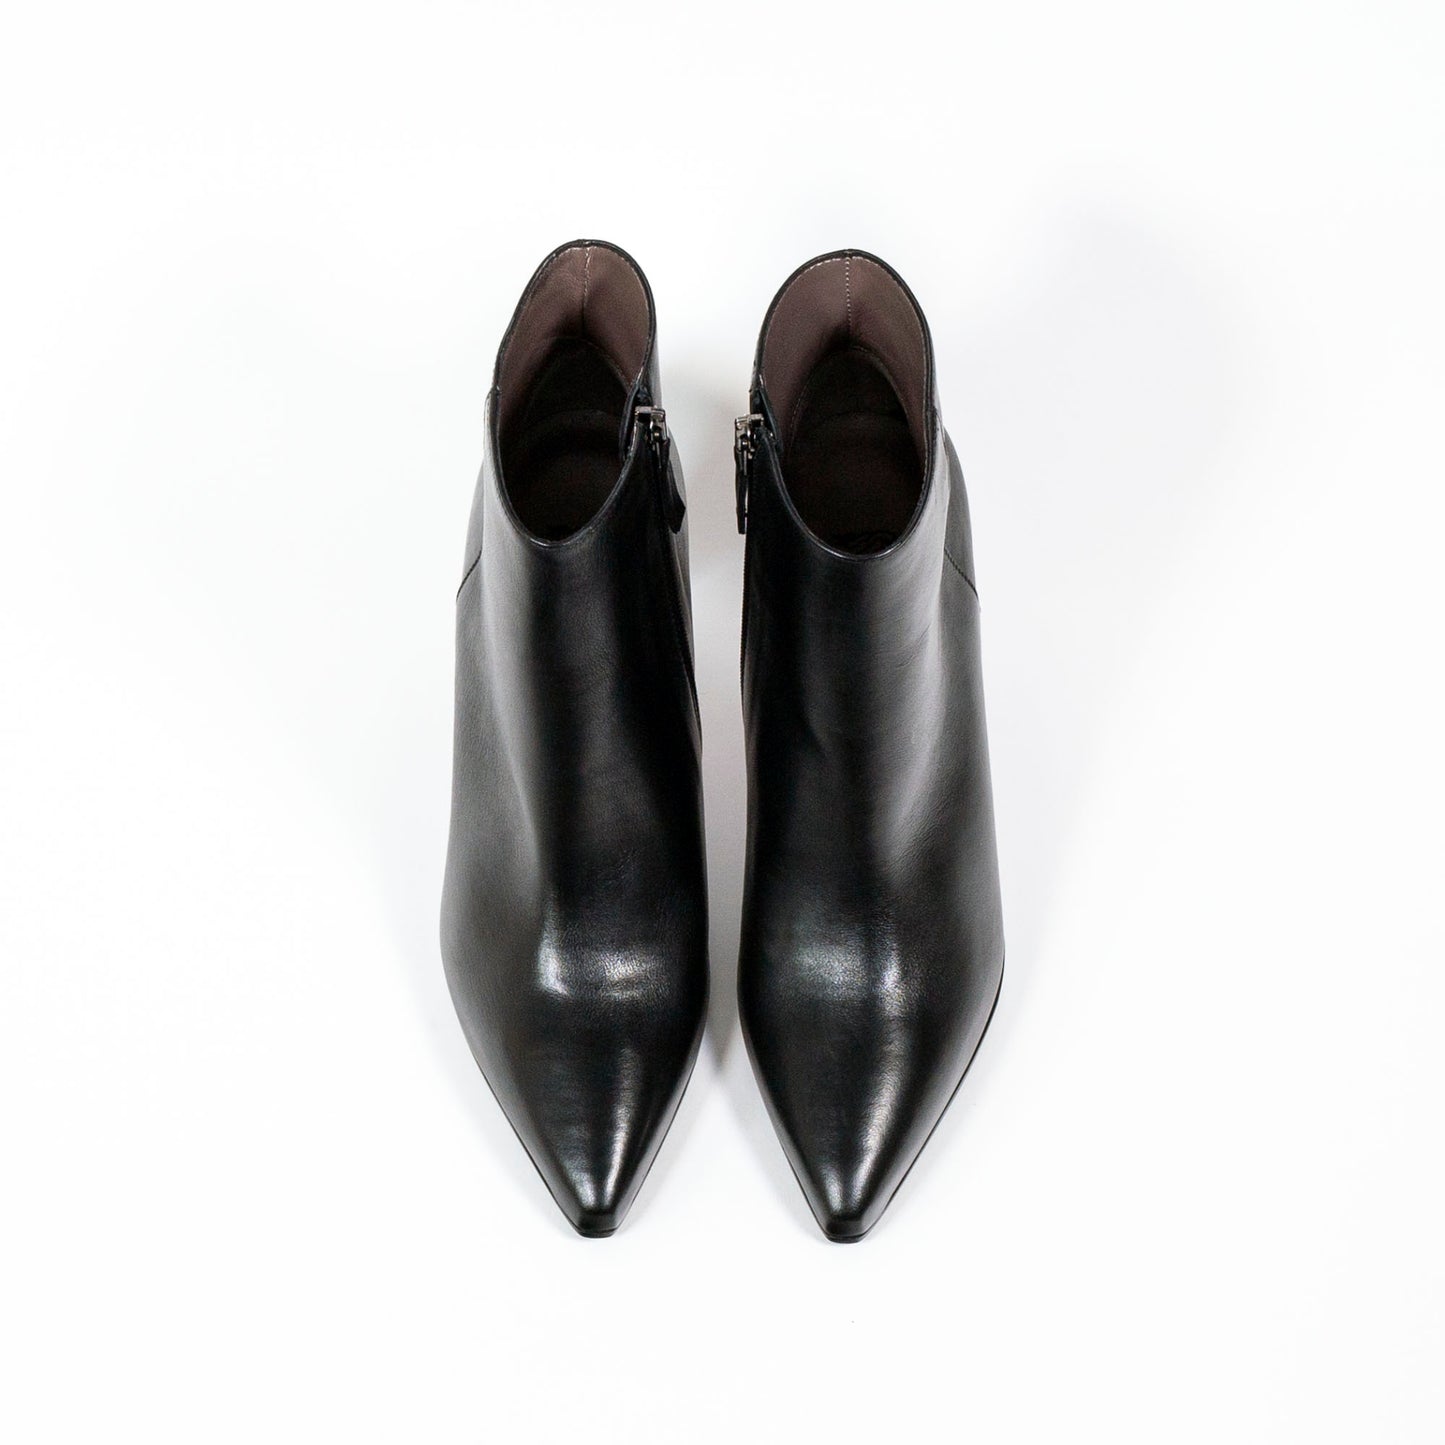 Catini - Ankle Boots